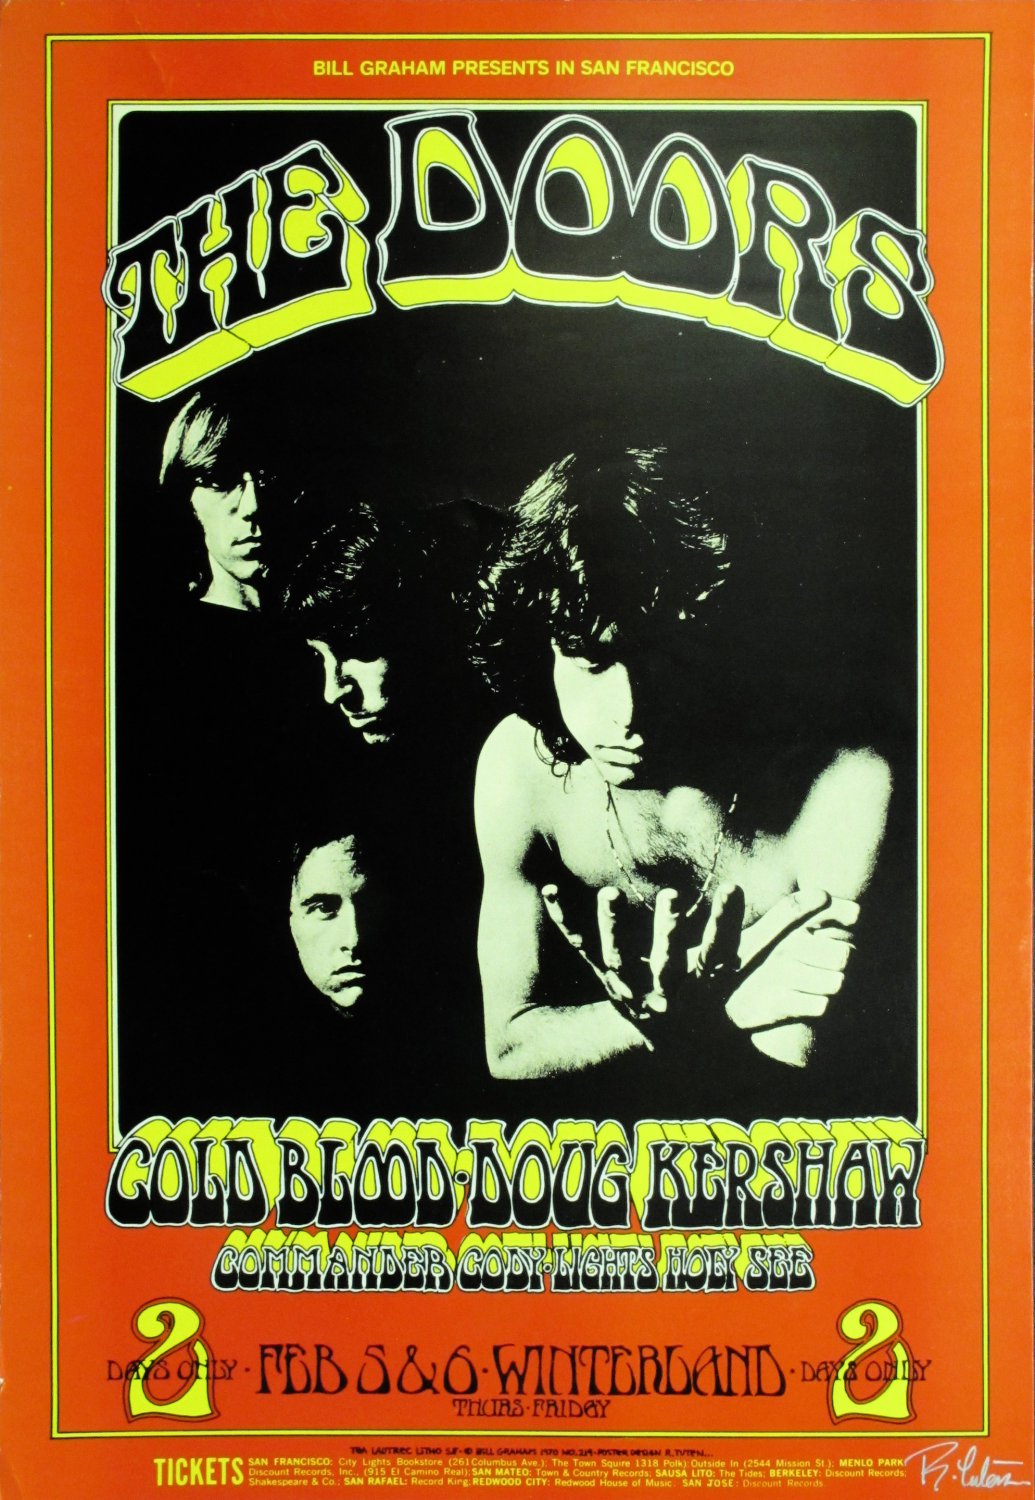 Doors Band Poster 13x19 inches